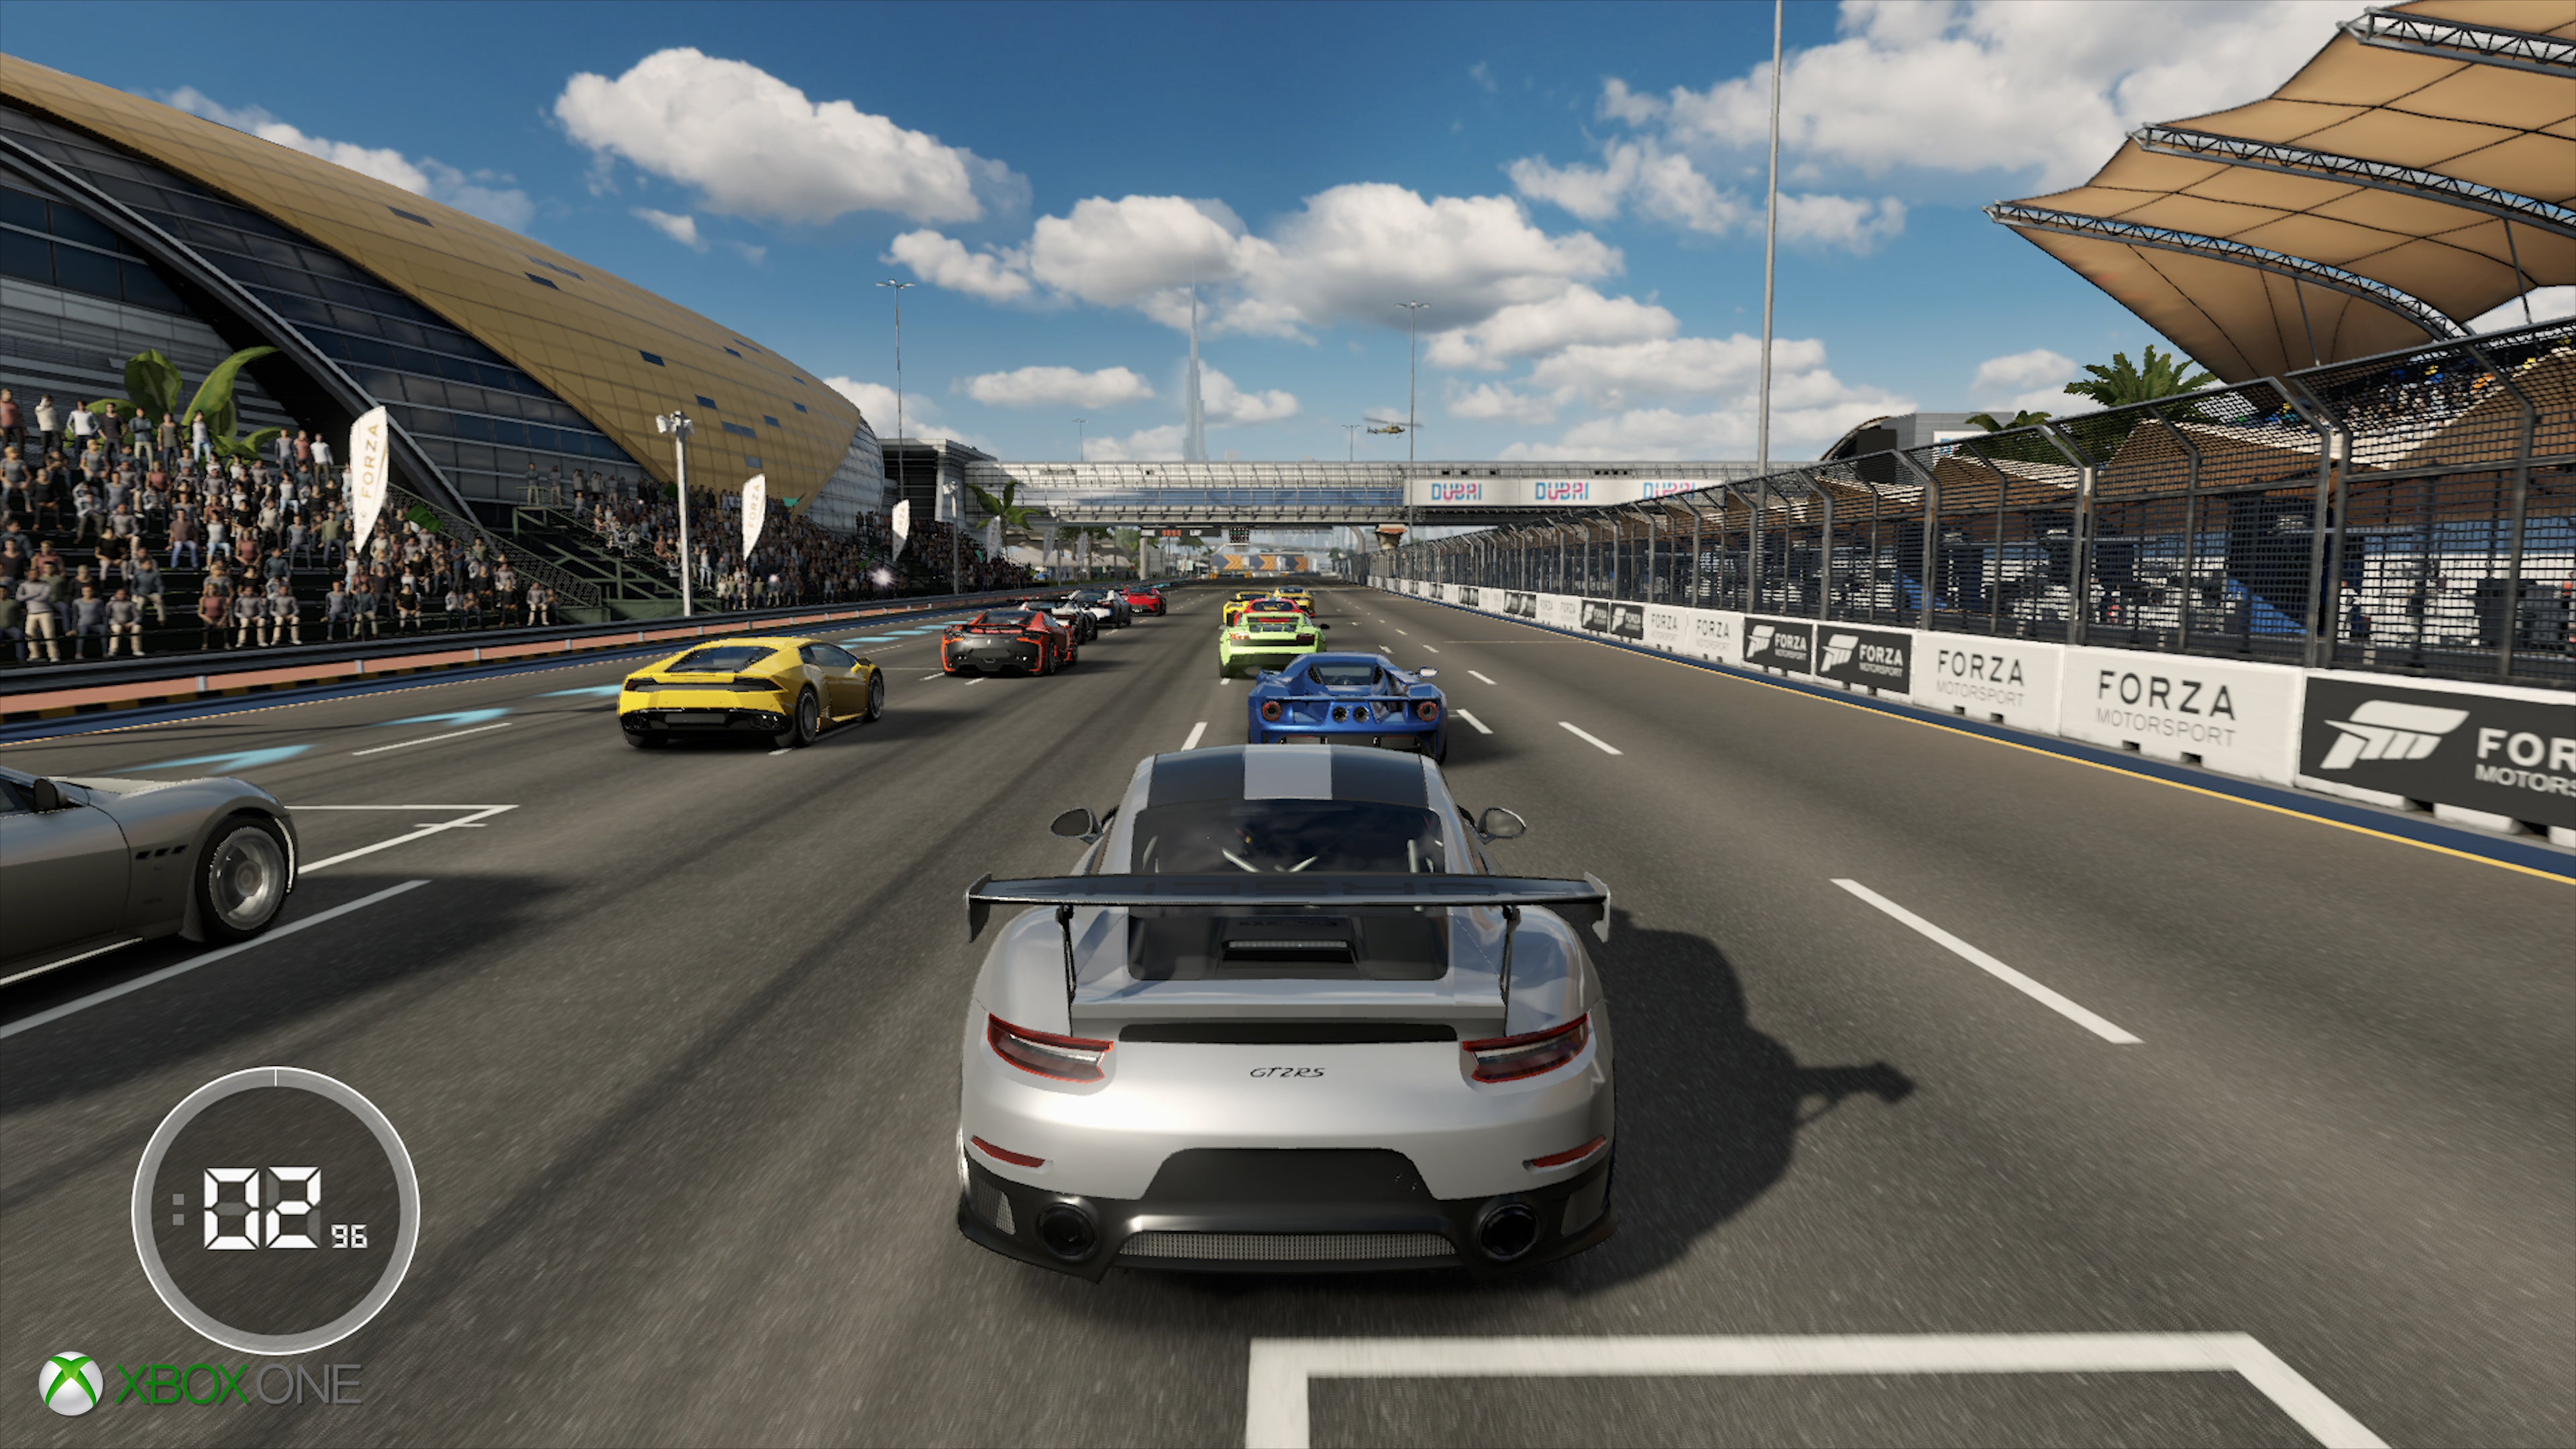 How does Forza 7 improve on Xbox One X over base hardware